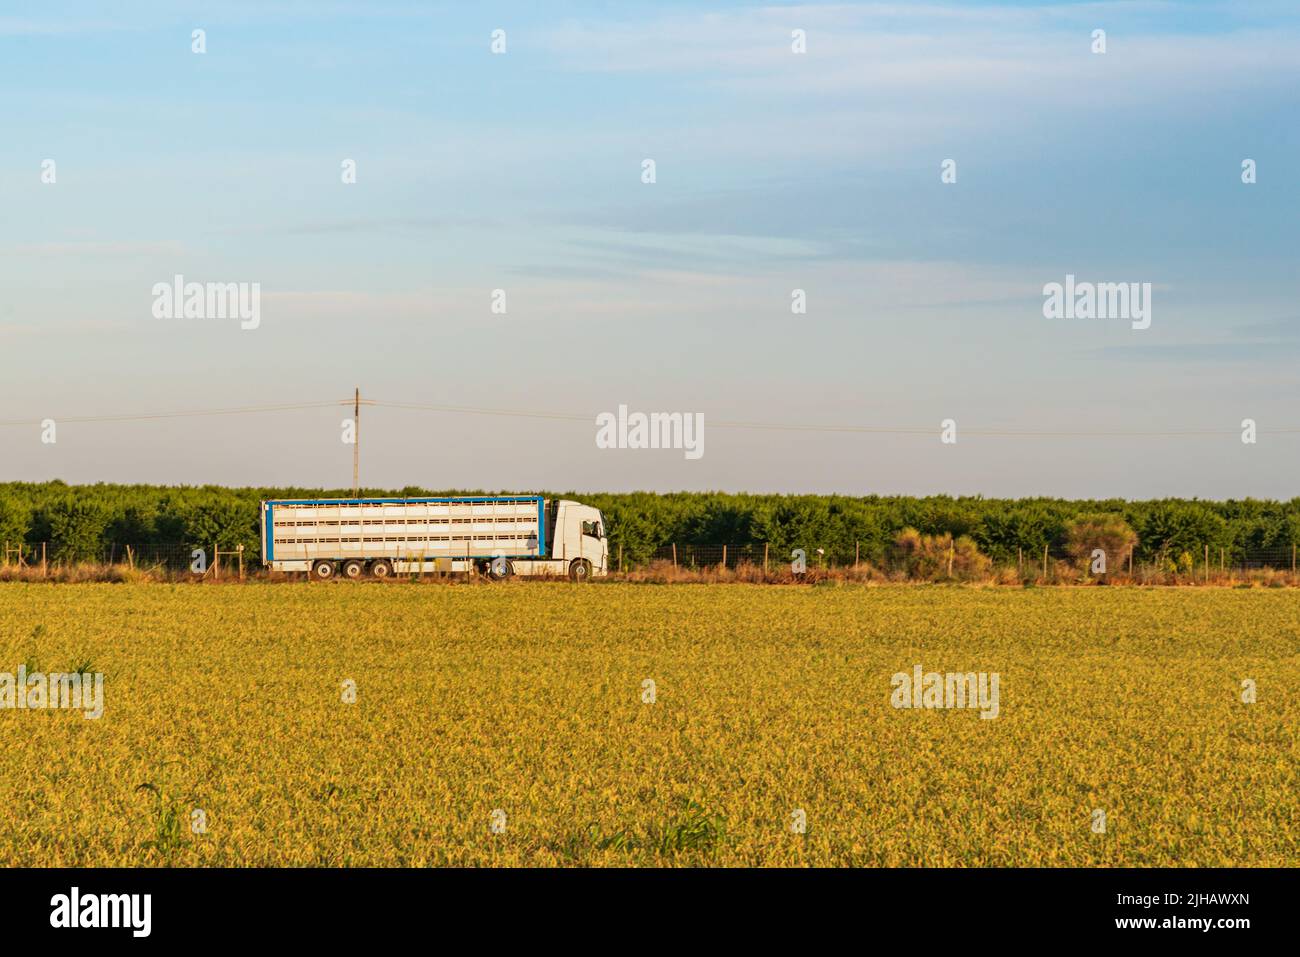 Cage truck for transporting cattle driving along a rural road. Stock Photo